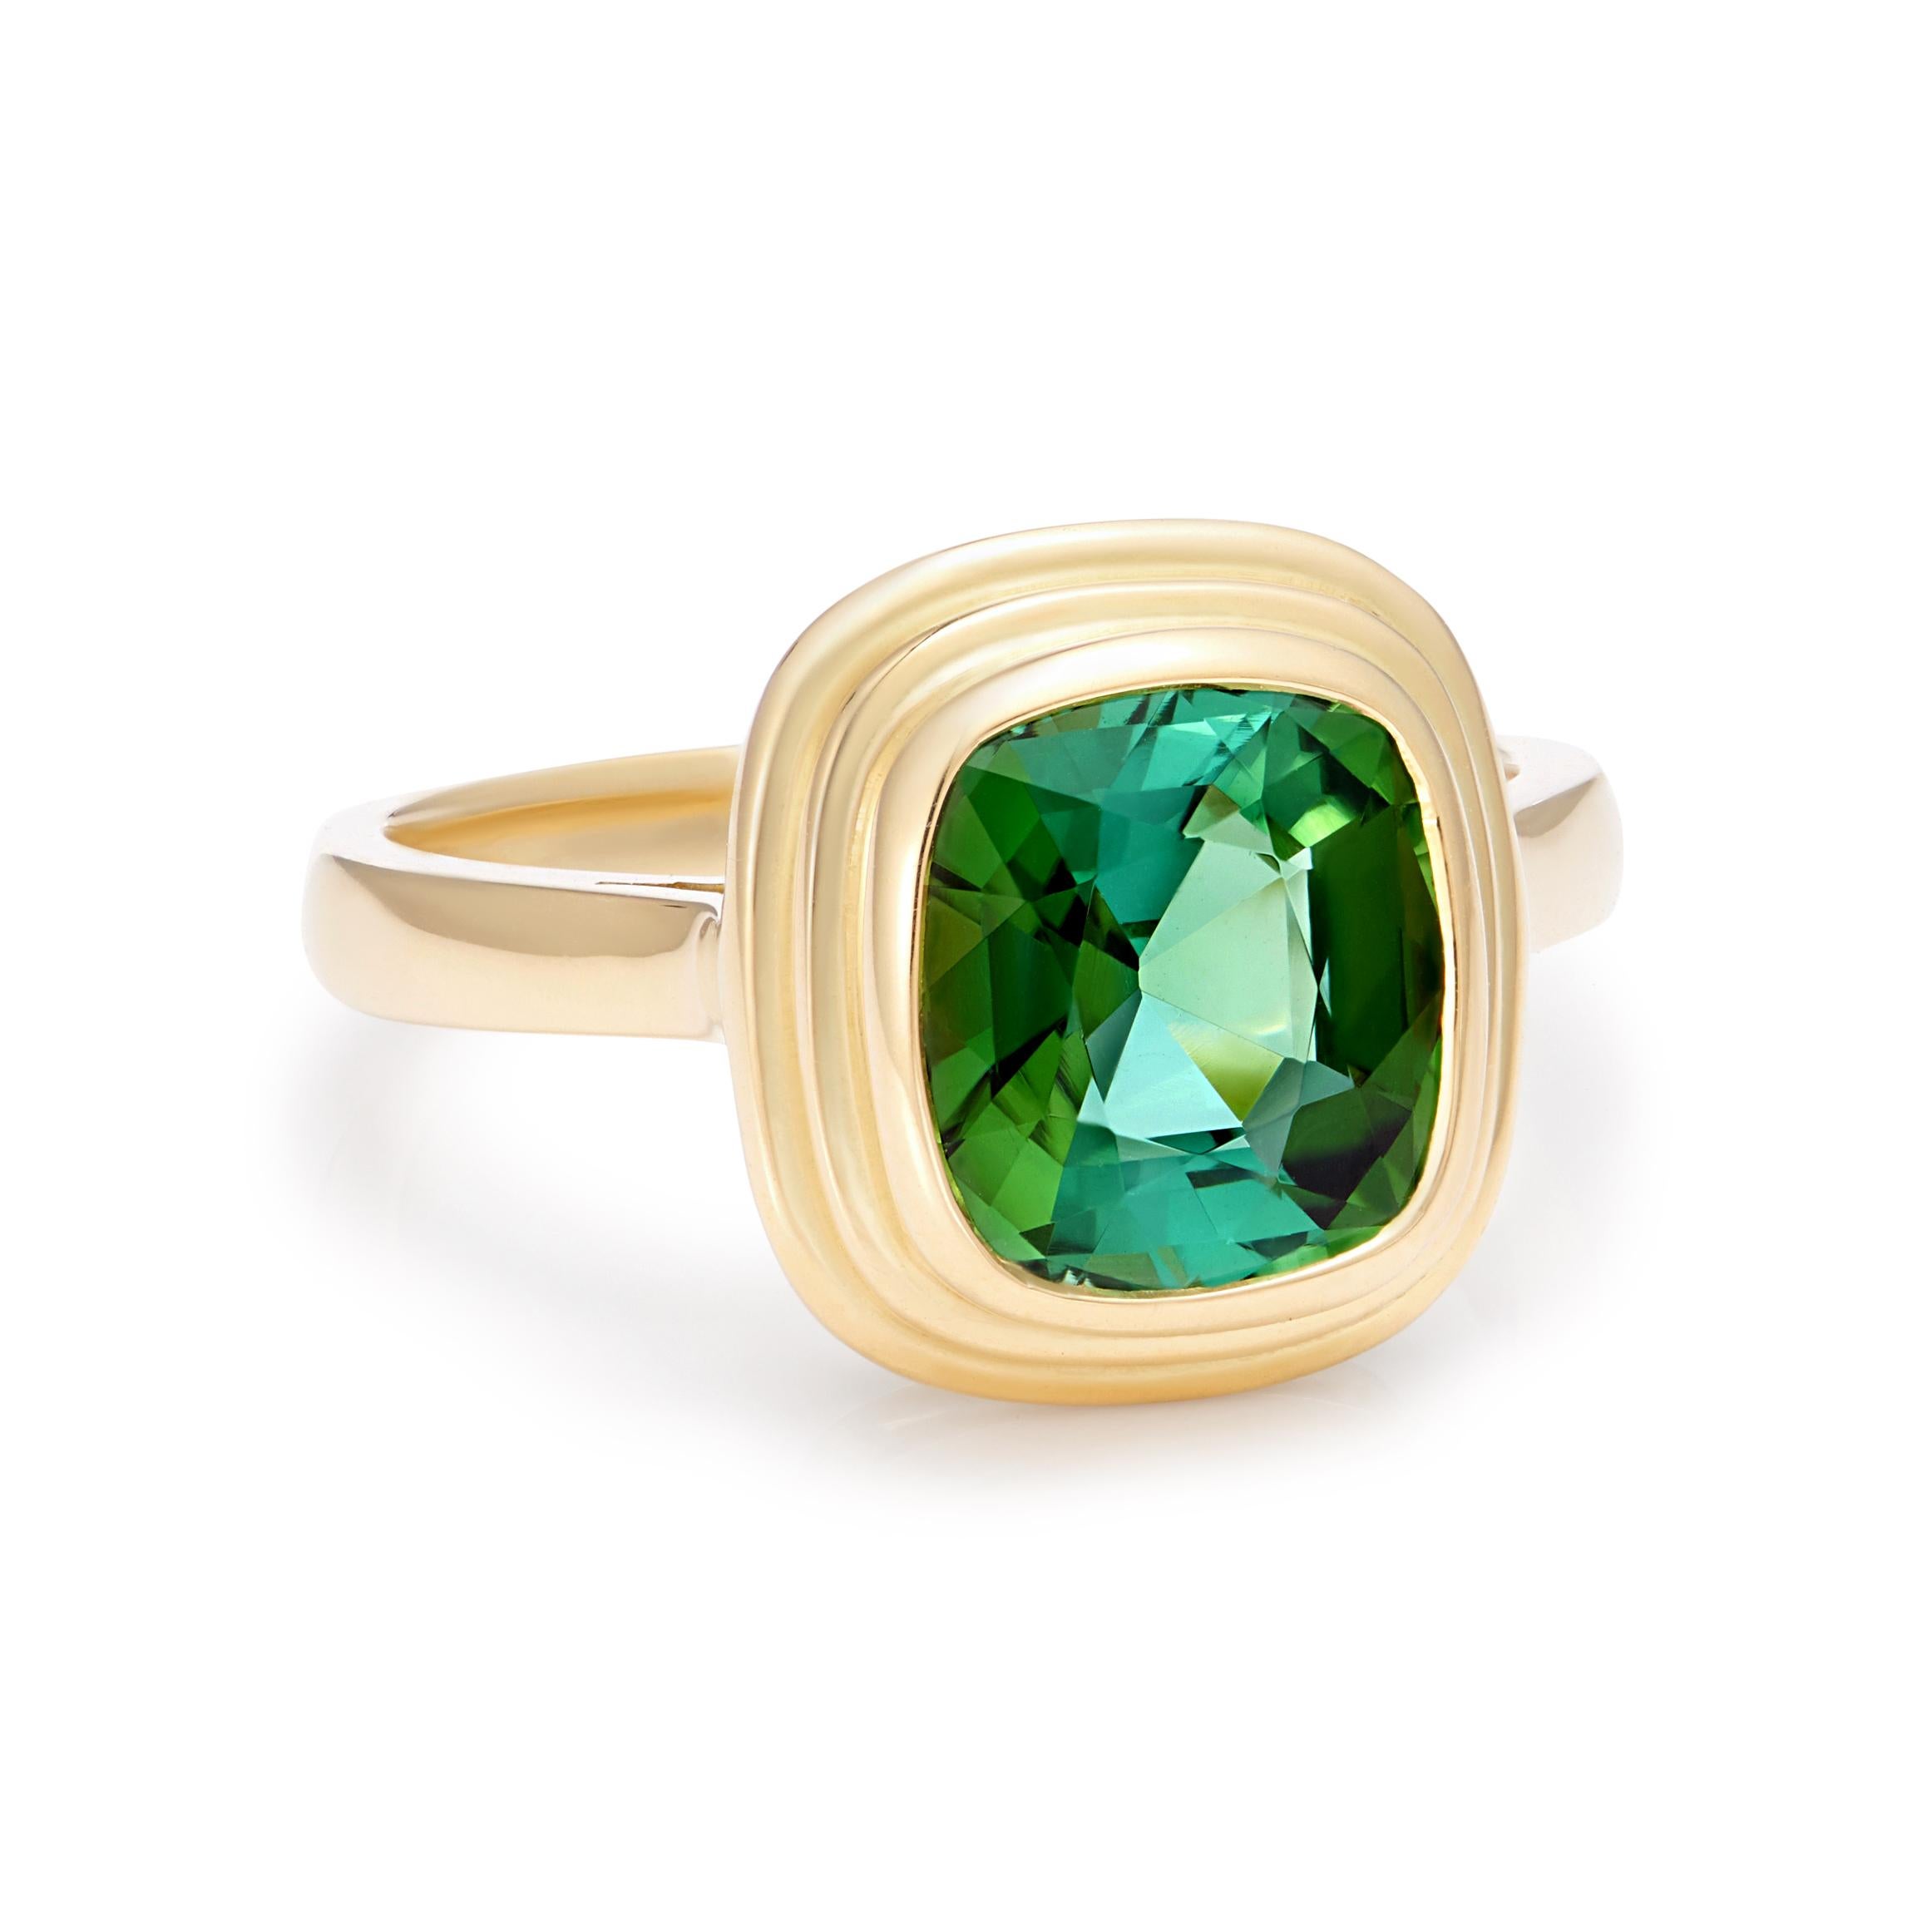 Stunning blue/green 2.5ct vivid Tourmaline set in 18kt yellow gold. This gem is a rare and unusual colour that really has a beautiful colour play, it has a superior cut, colour and clarity. 
Hand made in London, gemstone hand picked by London